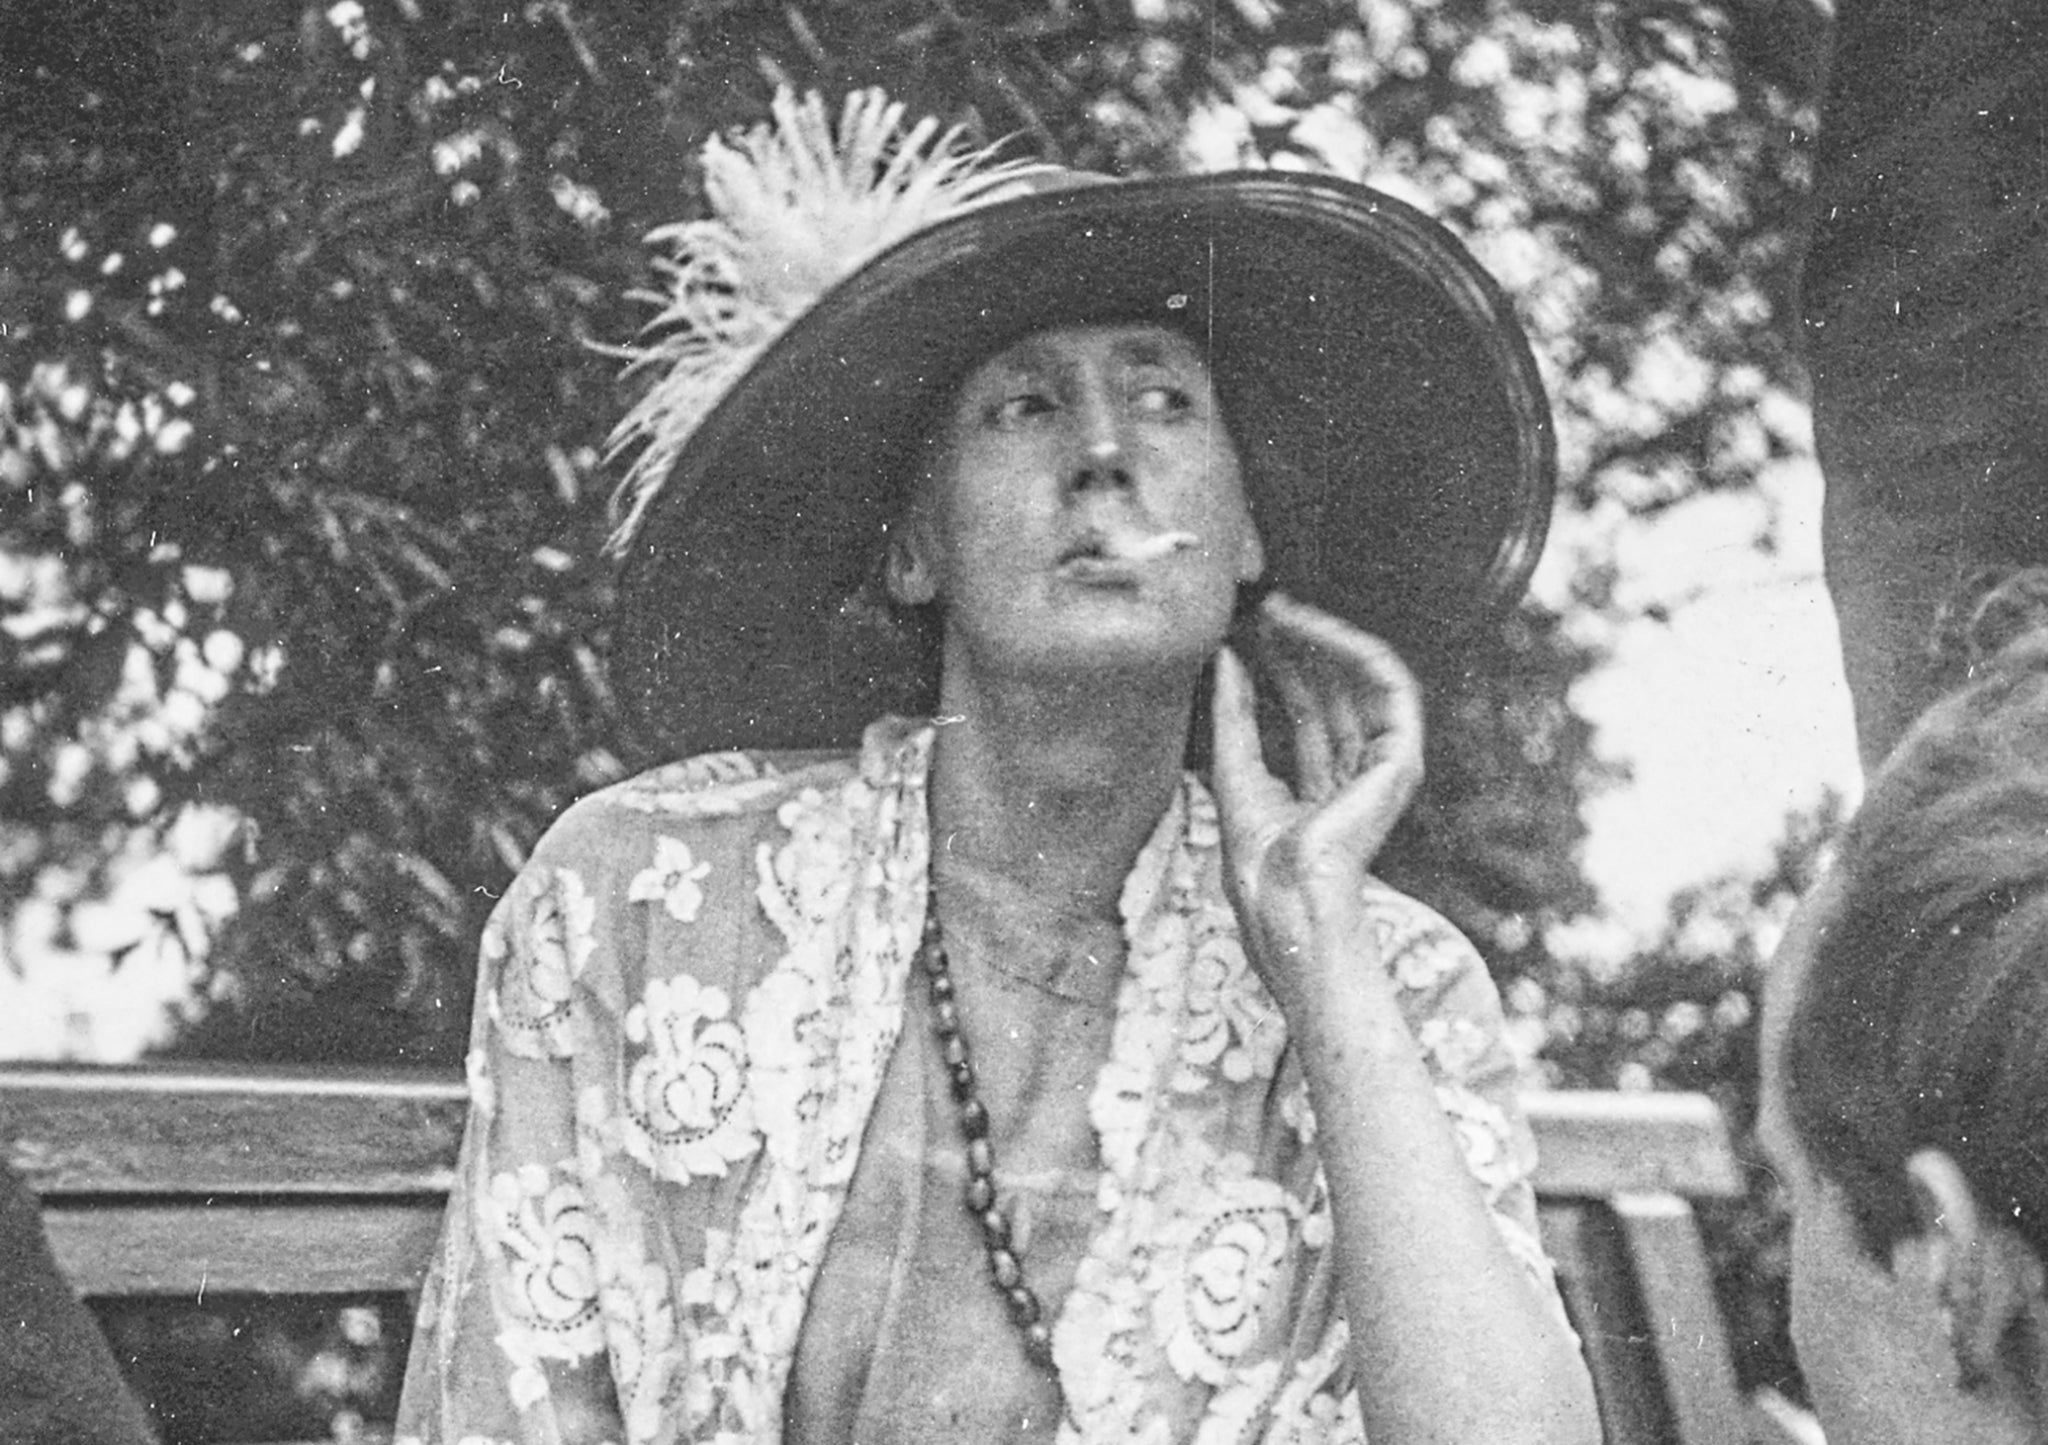 Virginia Woolf’s clothes shouldn’t be dismissed; instead, they are simply another avenue to explore her well-documented complicated genius